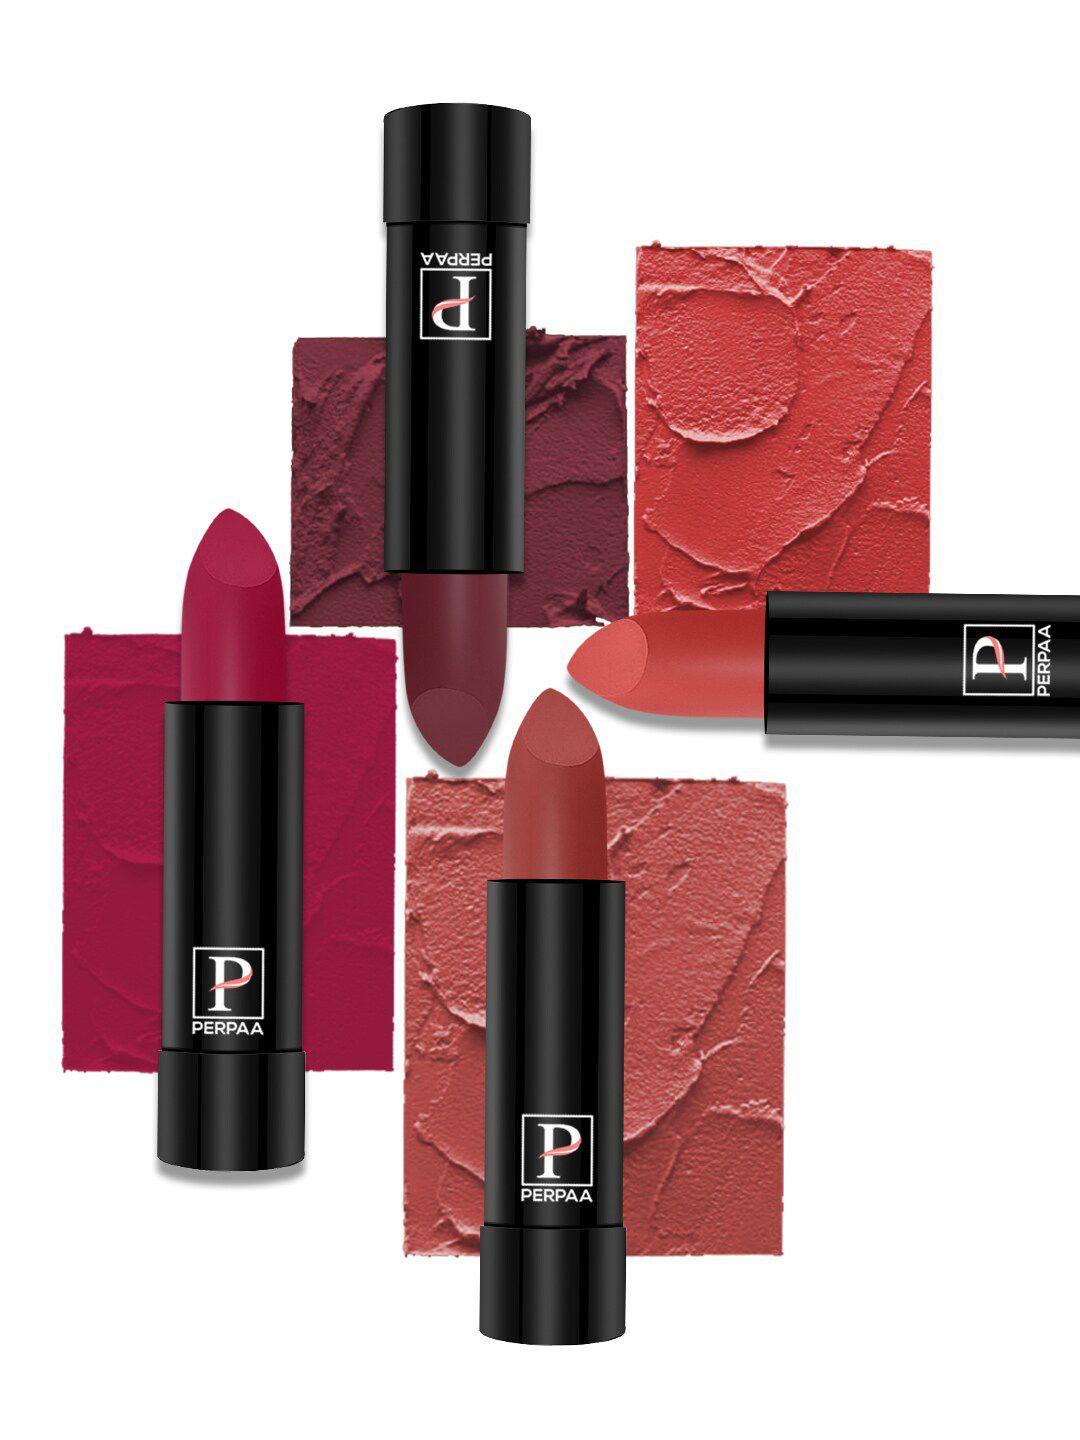 perpaa set of 4 creamy matte long lasting lipstick with beeswax- shades 71 + 73 + 80 + 93